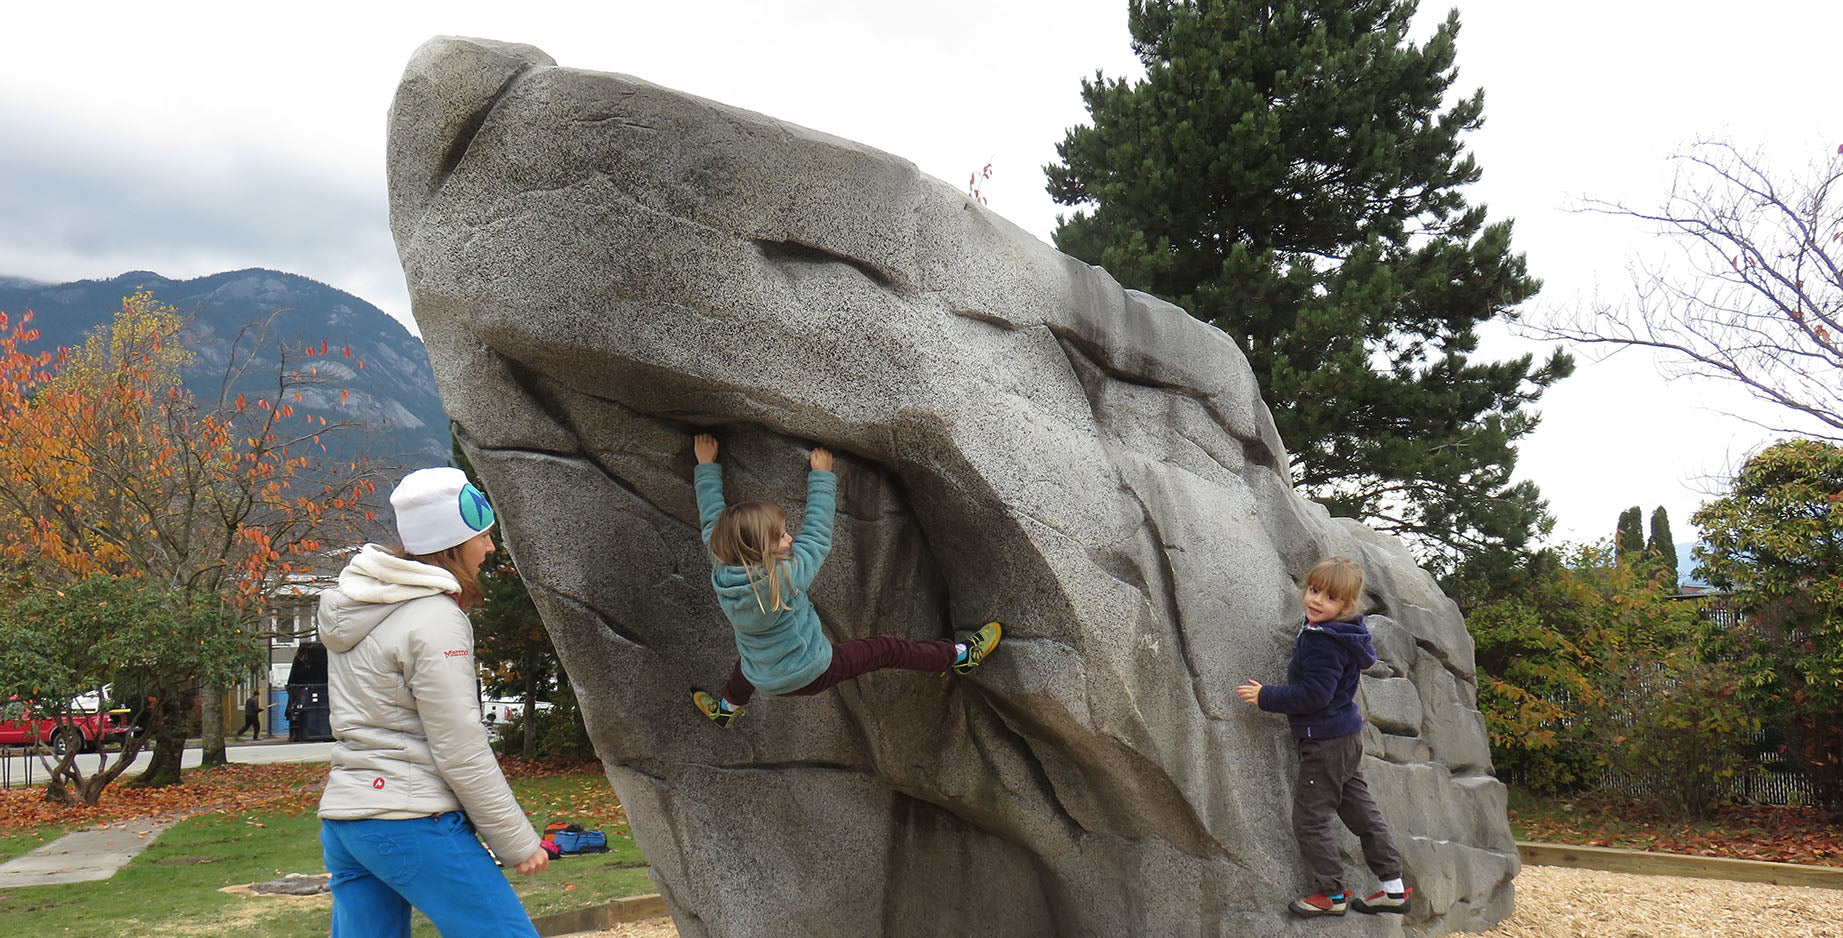 Kids learn bouldering, a type of sport climbing, in a city park in Squamish, BC